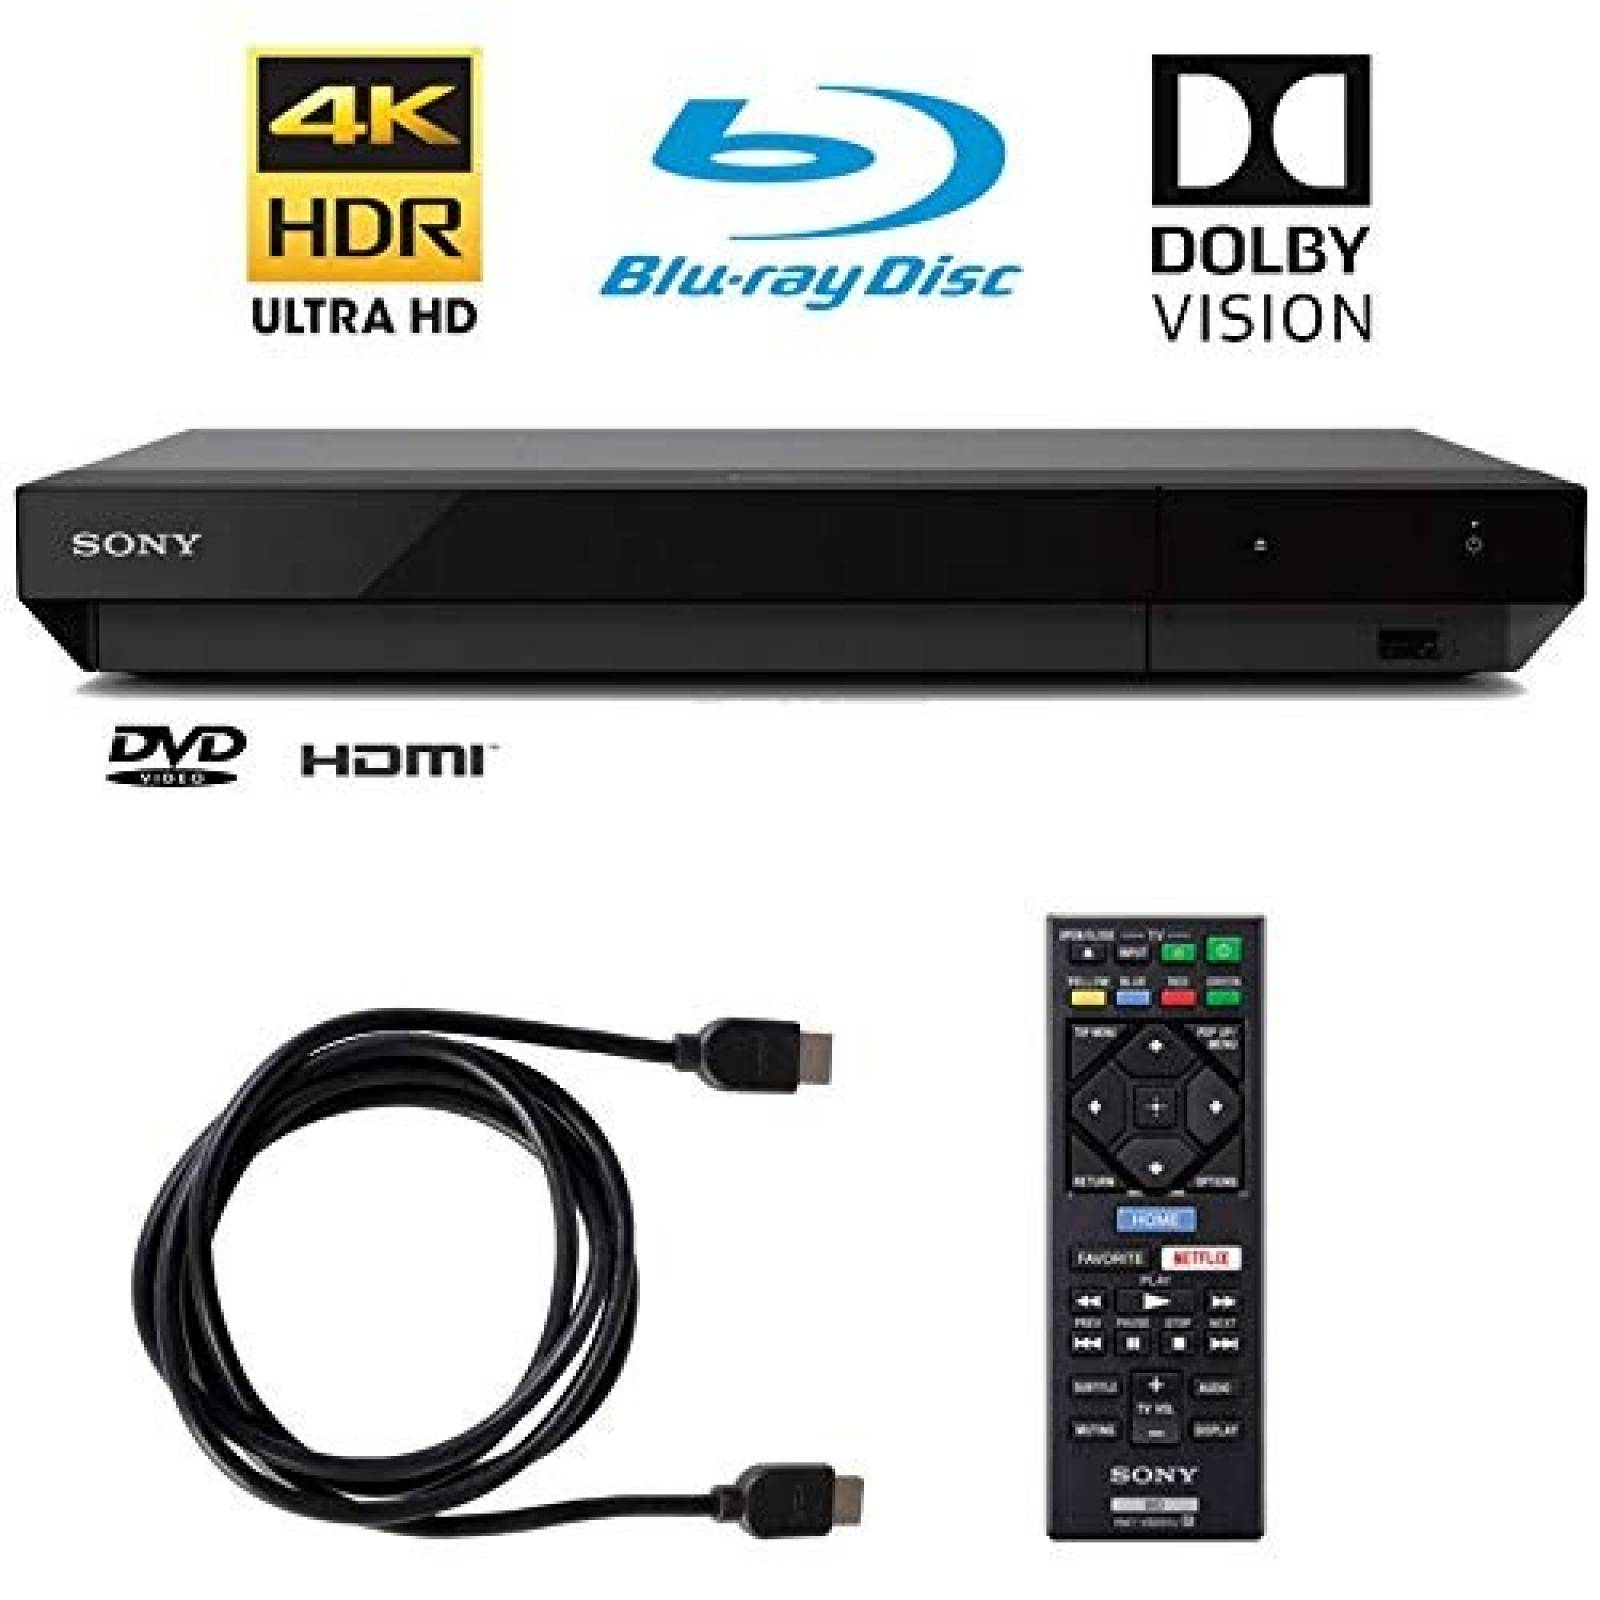 Reproductor de Blu-ray Sony UBP-X700 4K HDR con Dolby Vision